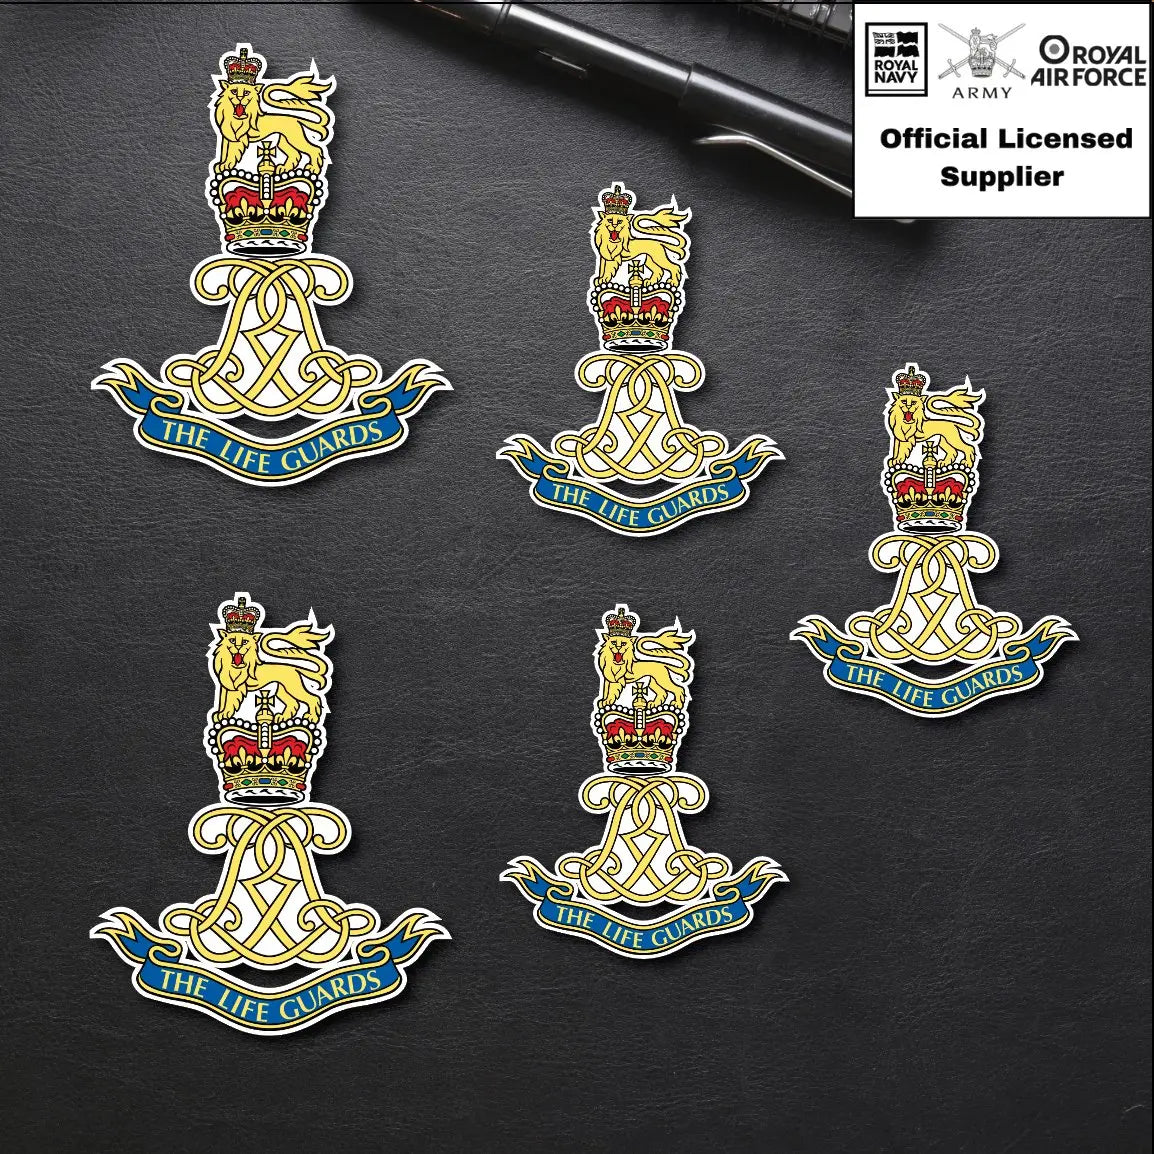 5 x The Life Guards Vinyl Stickers - 2x 75mm, 3x 50mm - Official MoD Reseller redplume